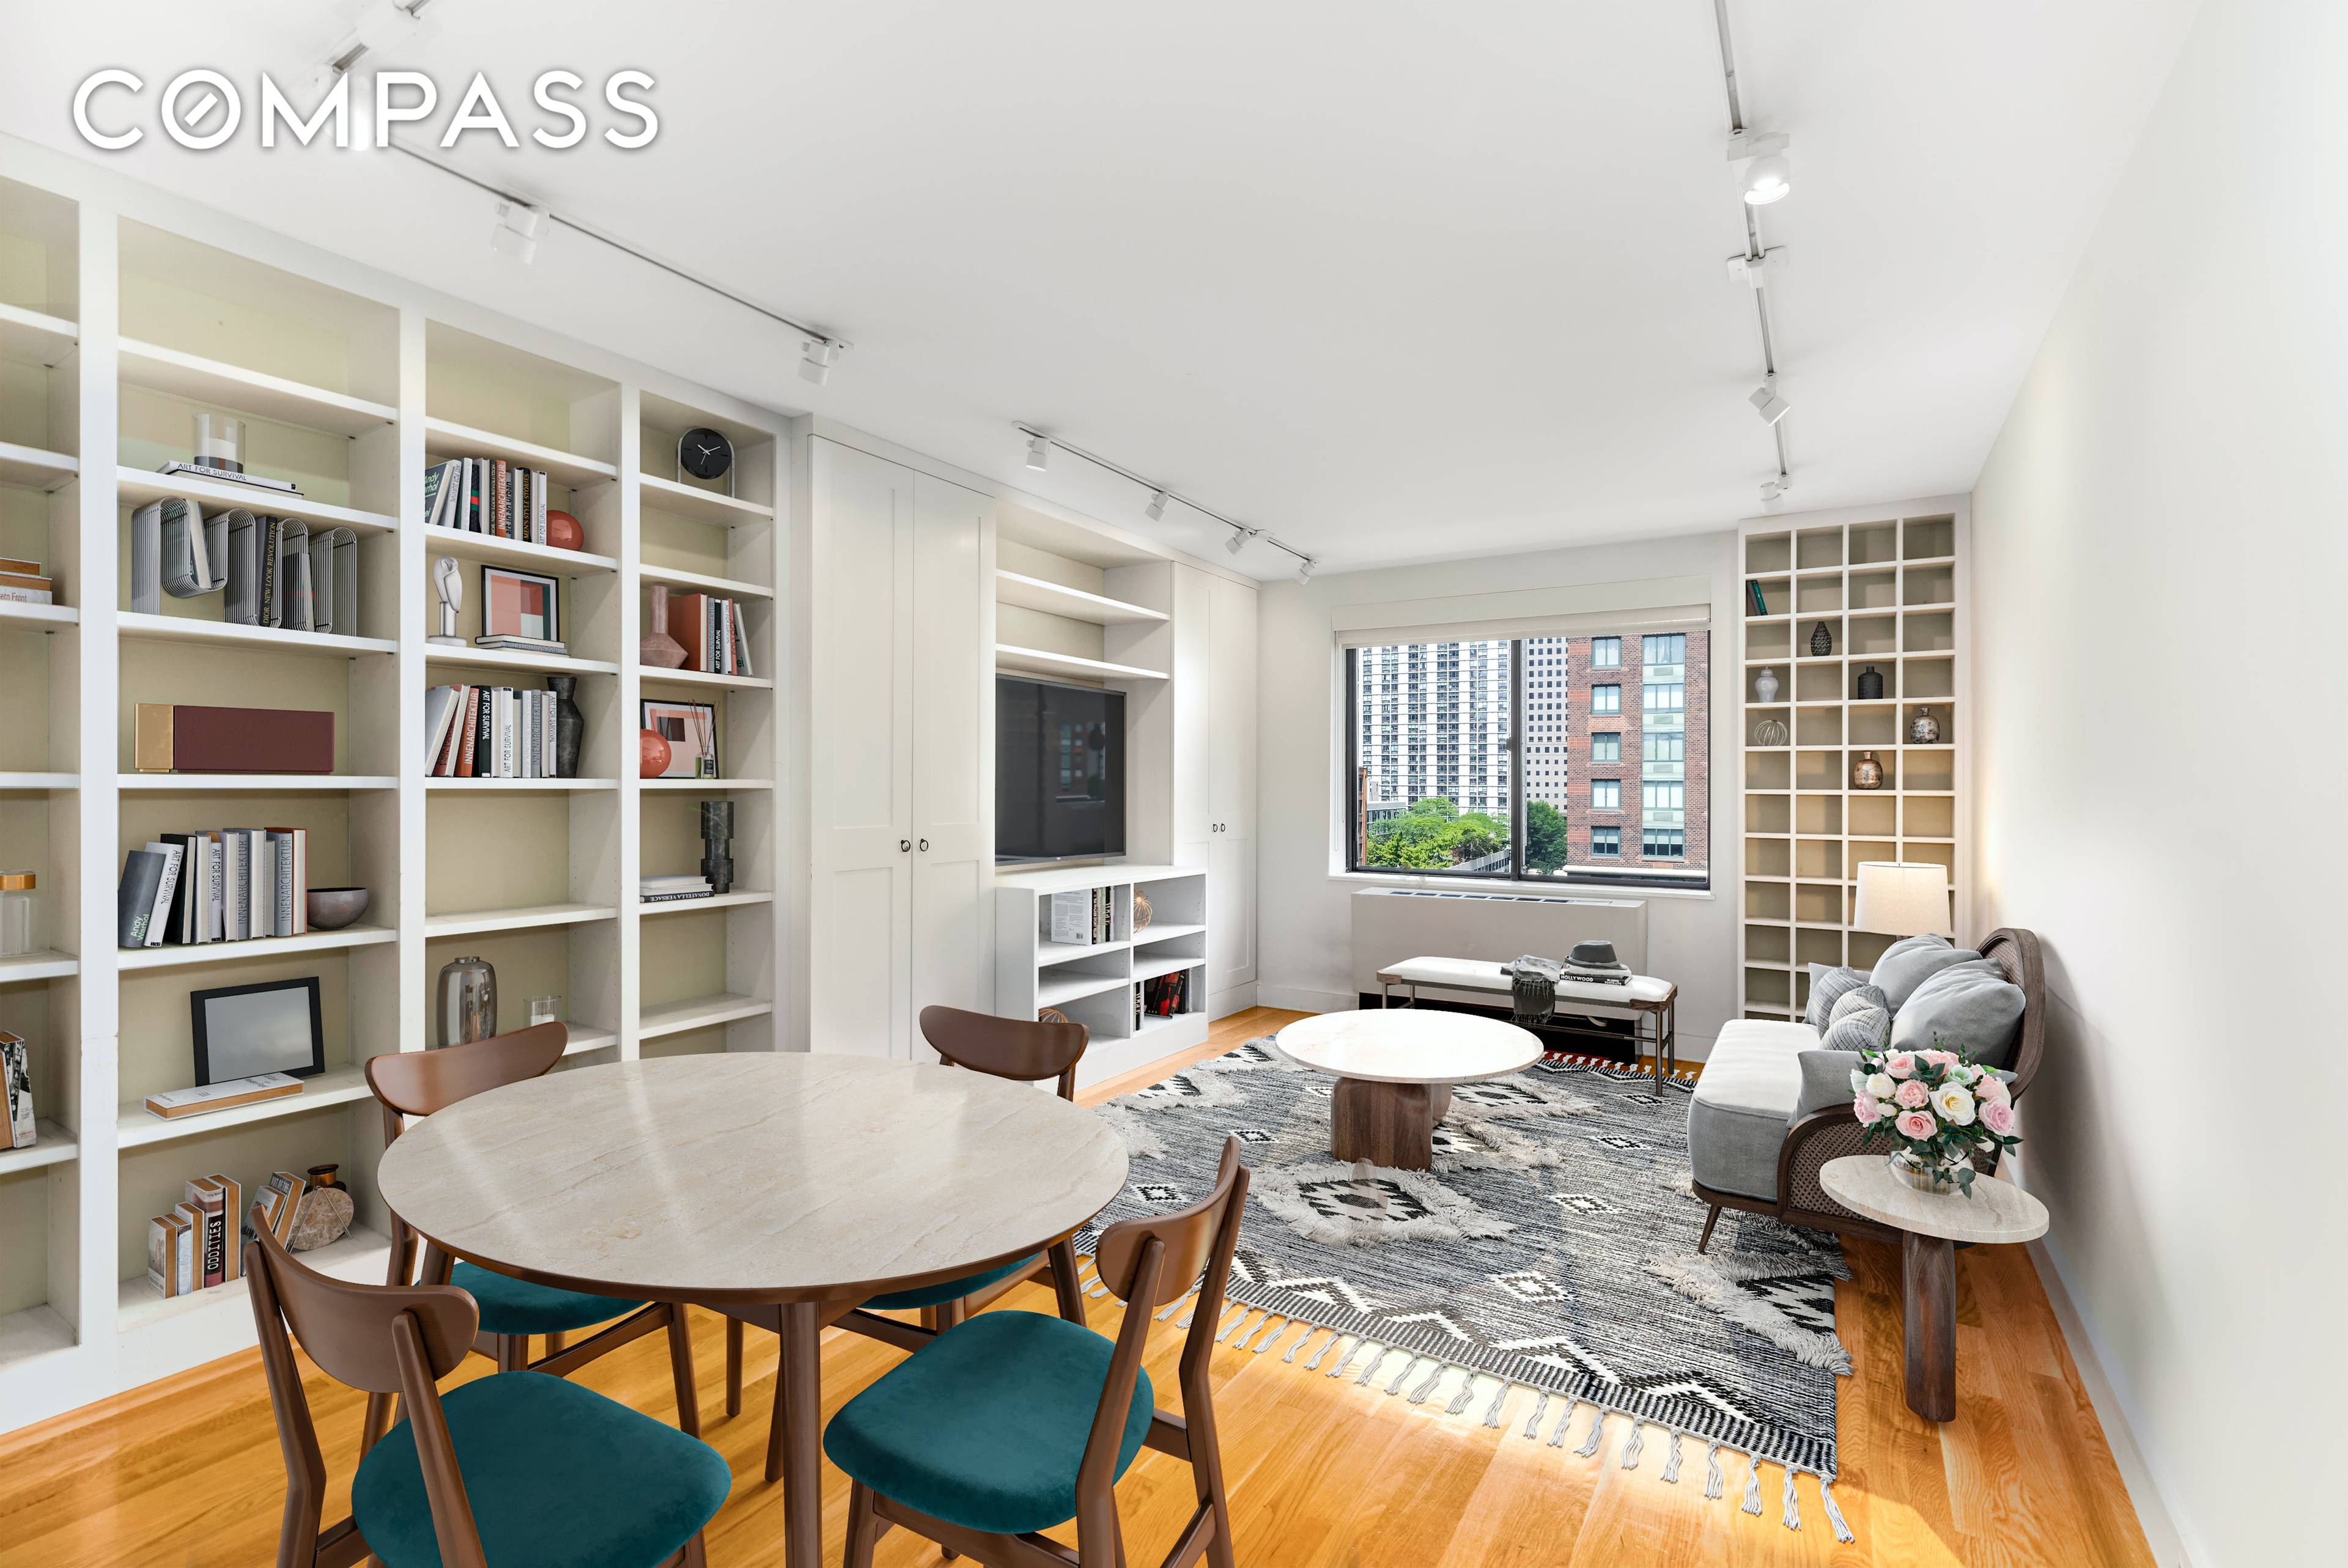 An incredible opportunity to purchase a wonderfully renovated two bedroom, two bathroom unit in the best boutique condo building in Battery Park City.